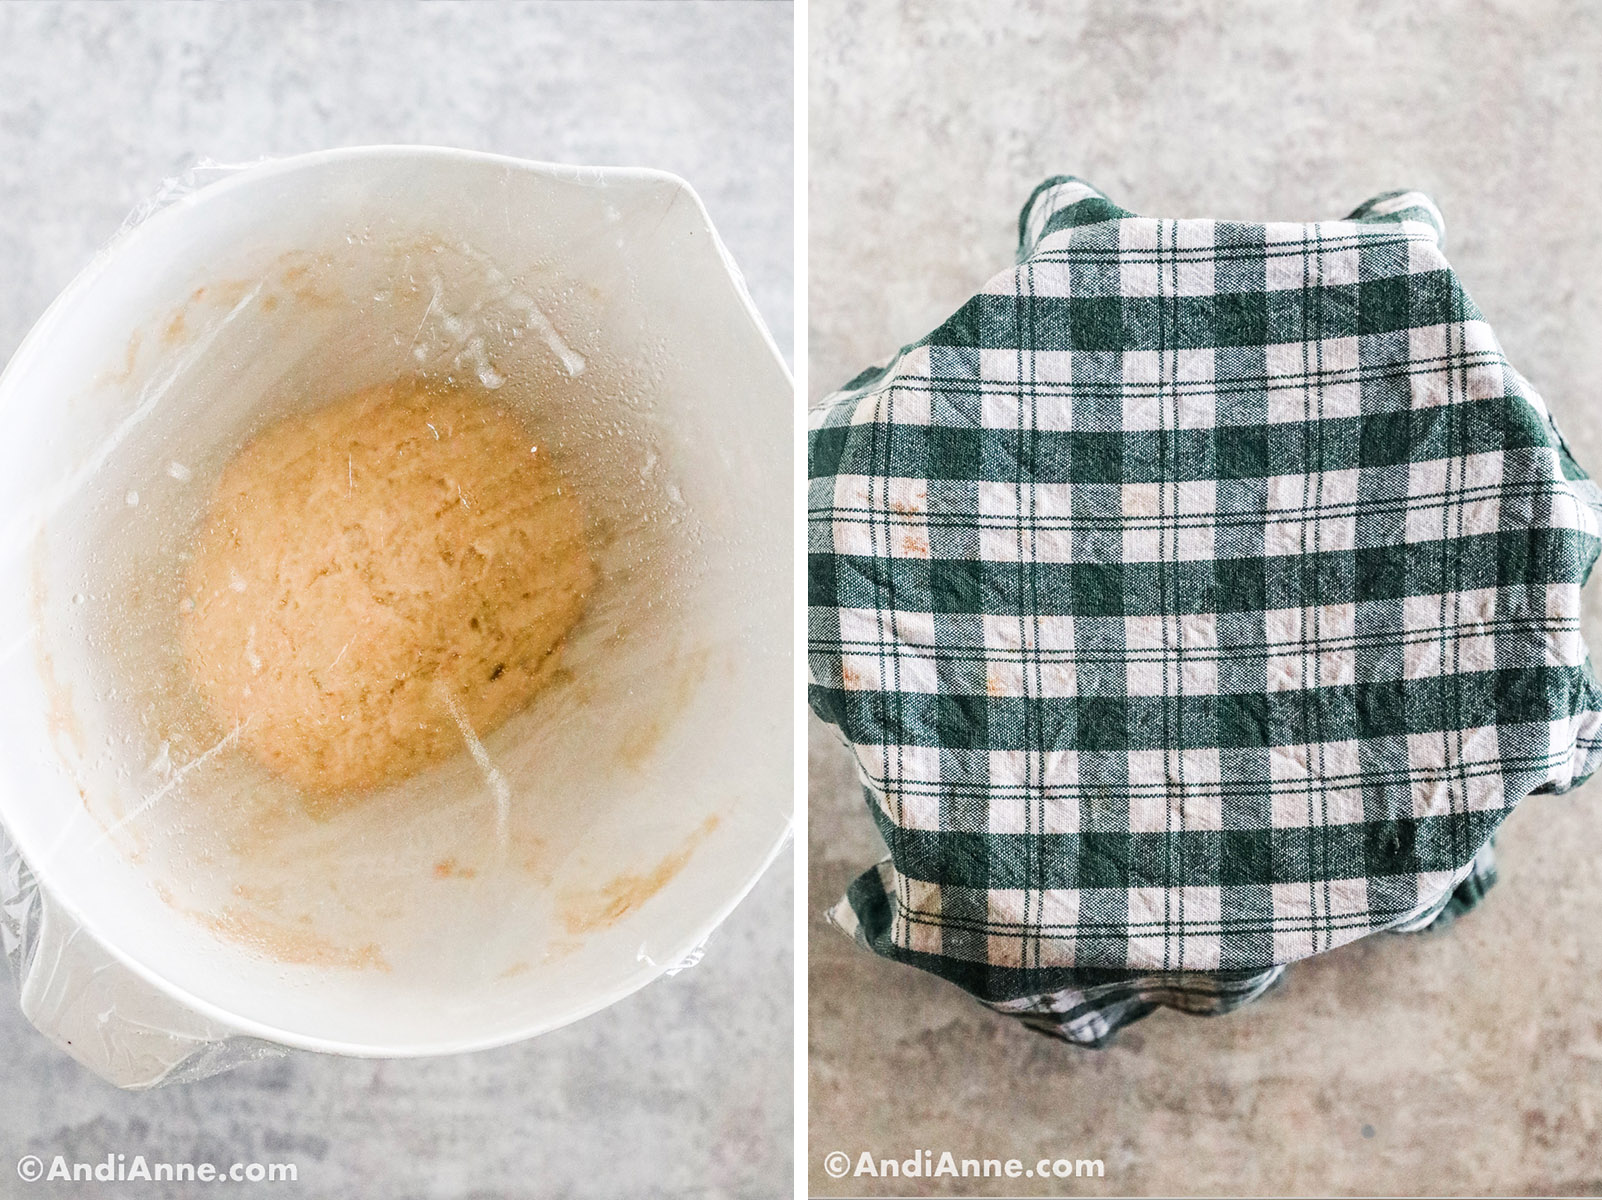 Two images, first is a white bowl with a dough ball inside and plastic wrap on top. Second is a green plaid tea towel.